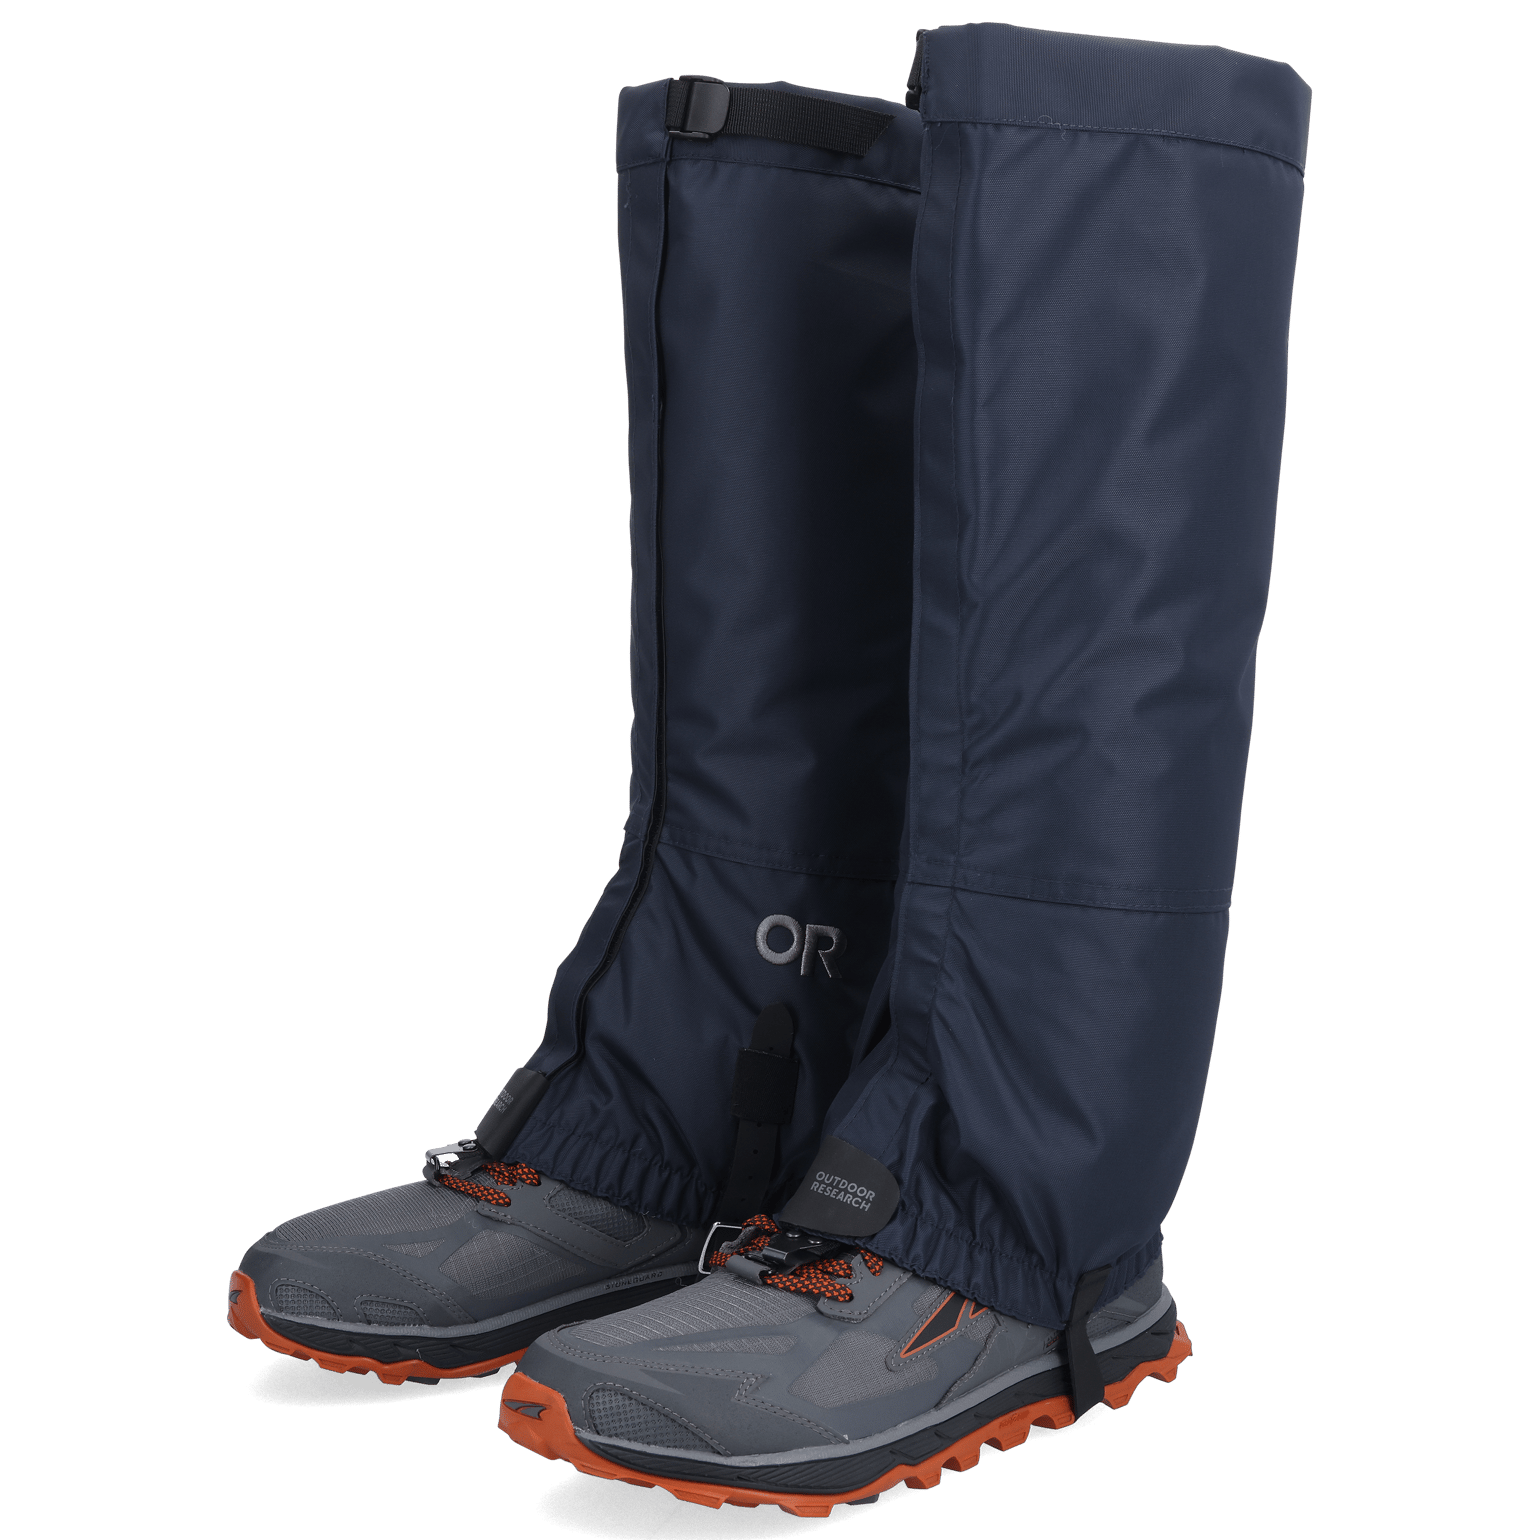 Outdoor Research Men's Rocky Mountain High Gaiters Naval Blue